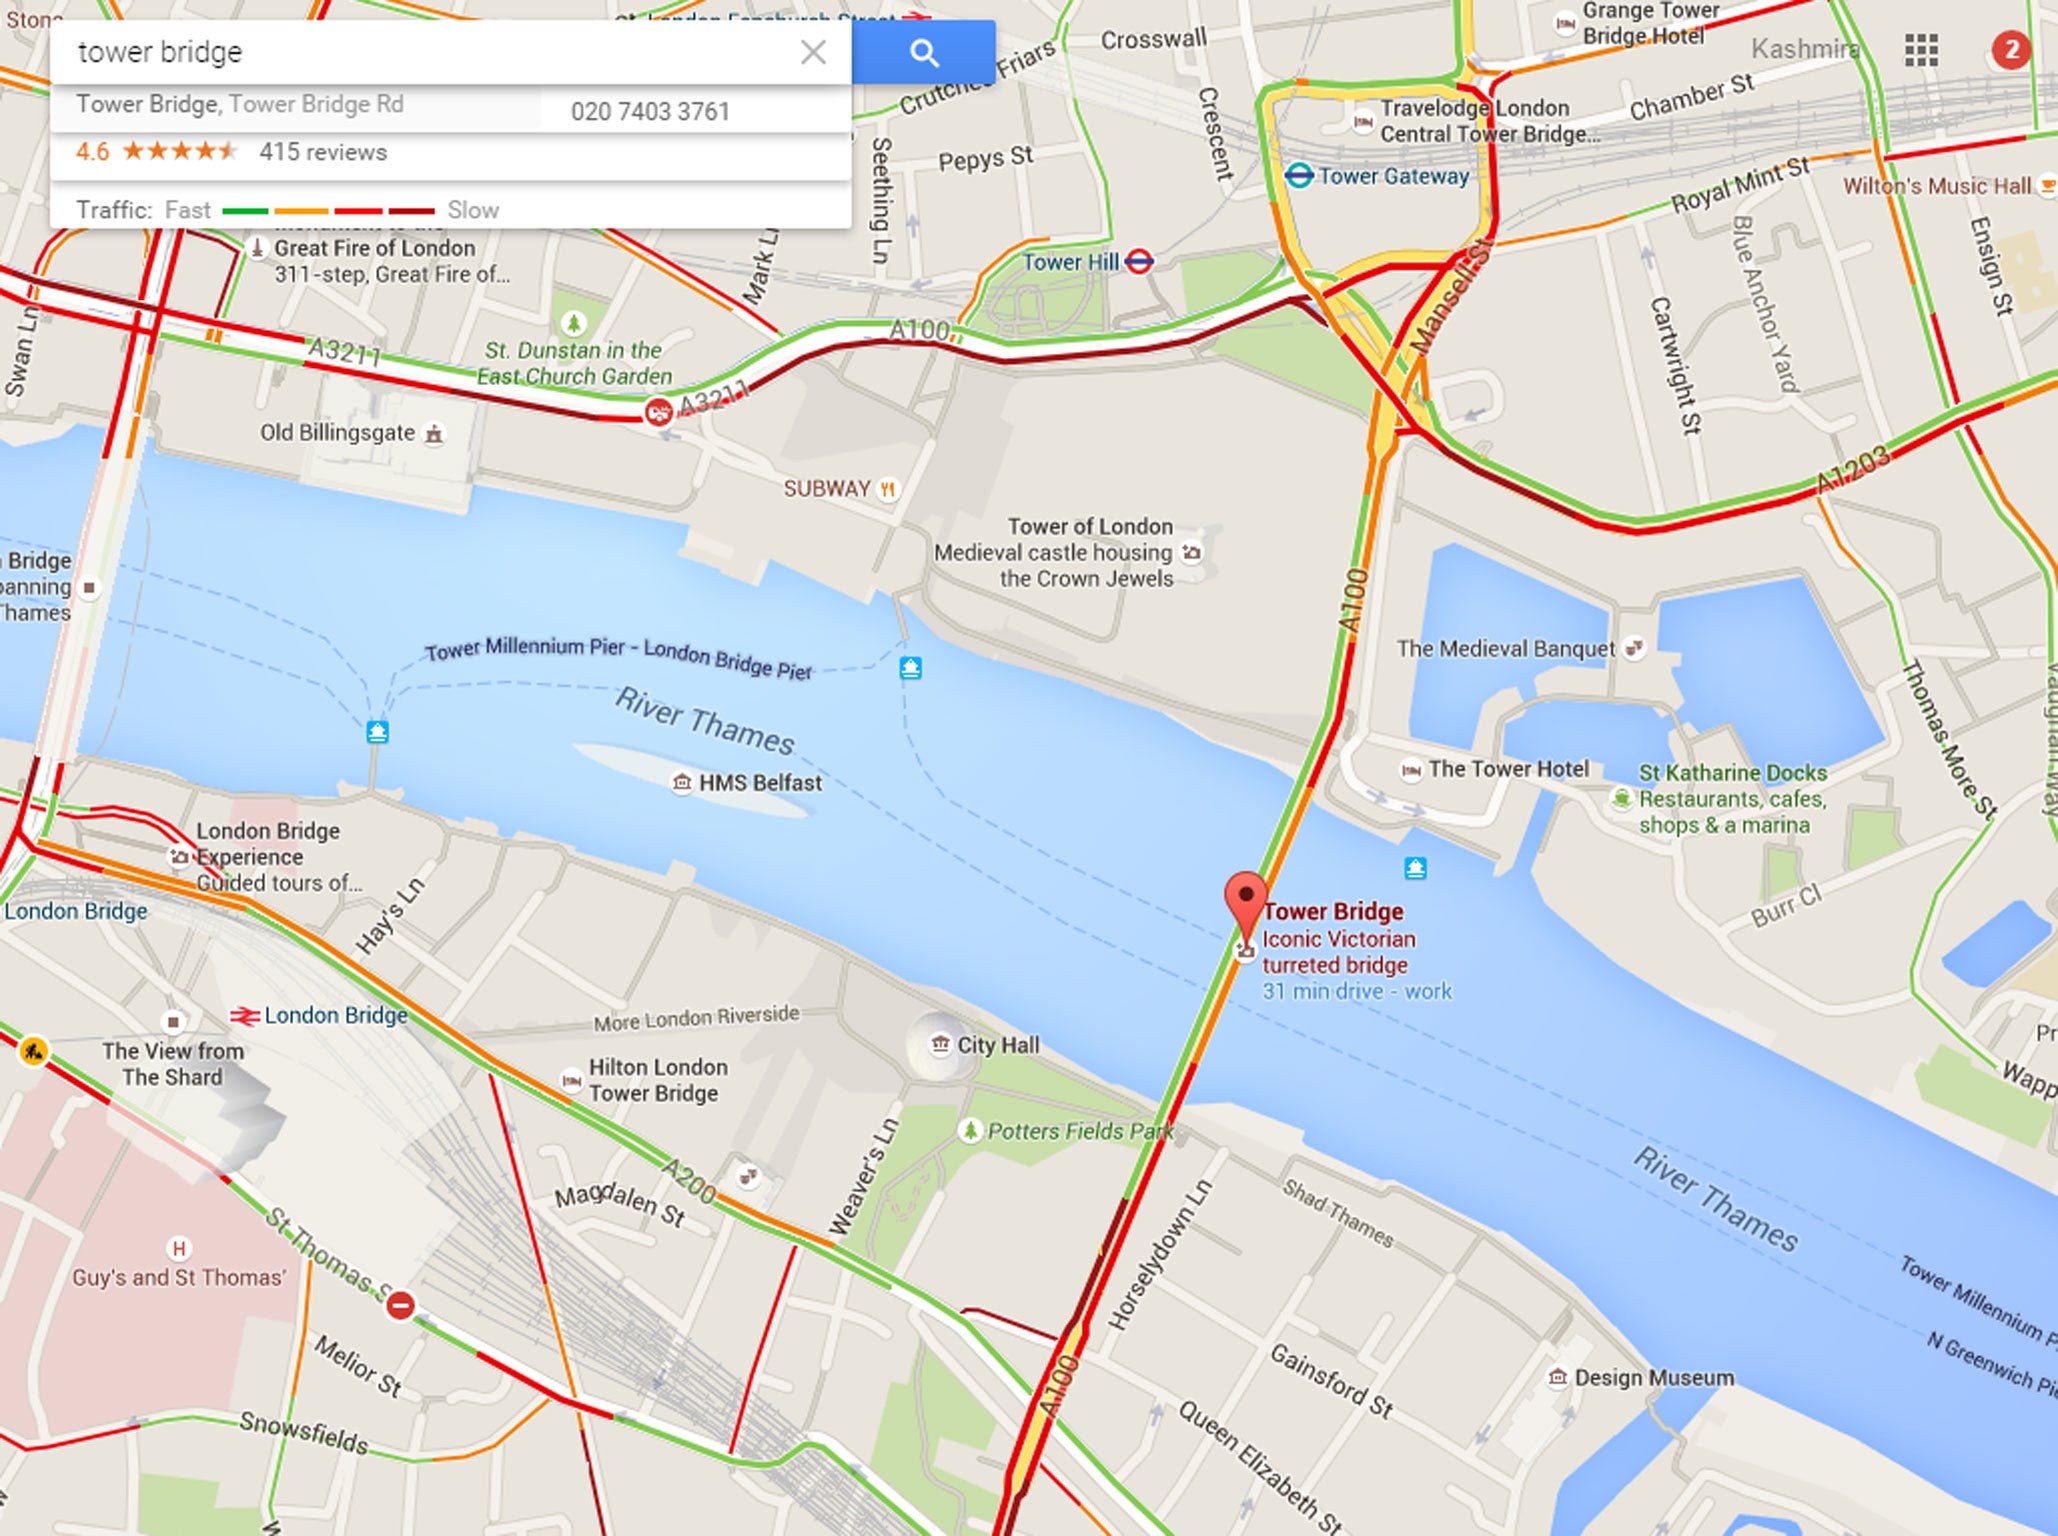 Map showing the traffic around Tower Bridge following the incident